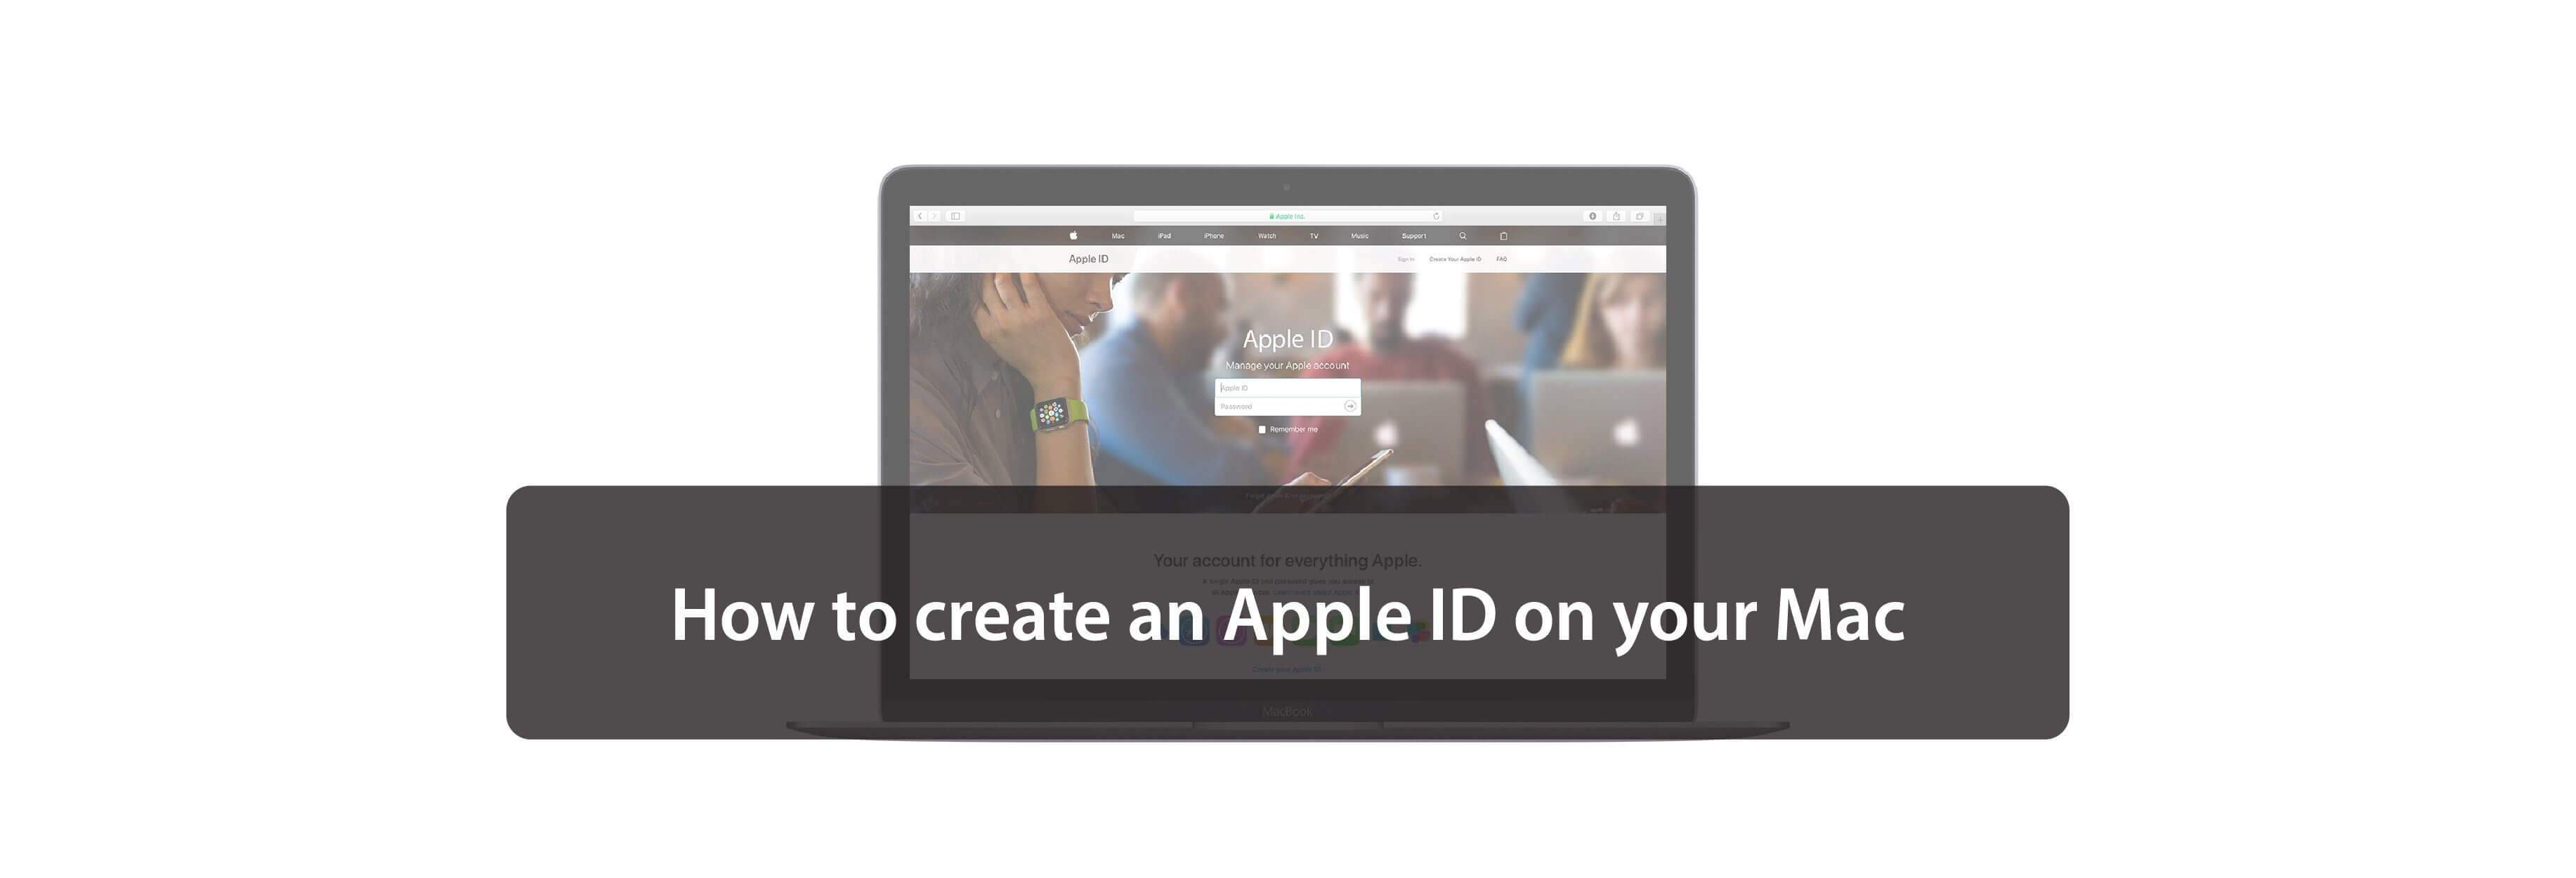 How to create an Apple ID on your Mac